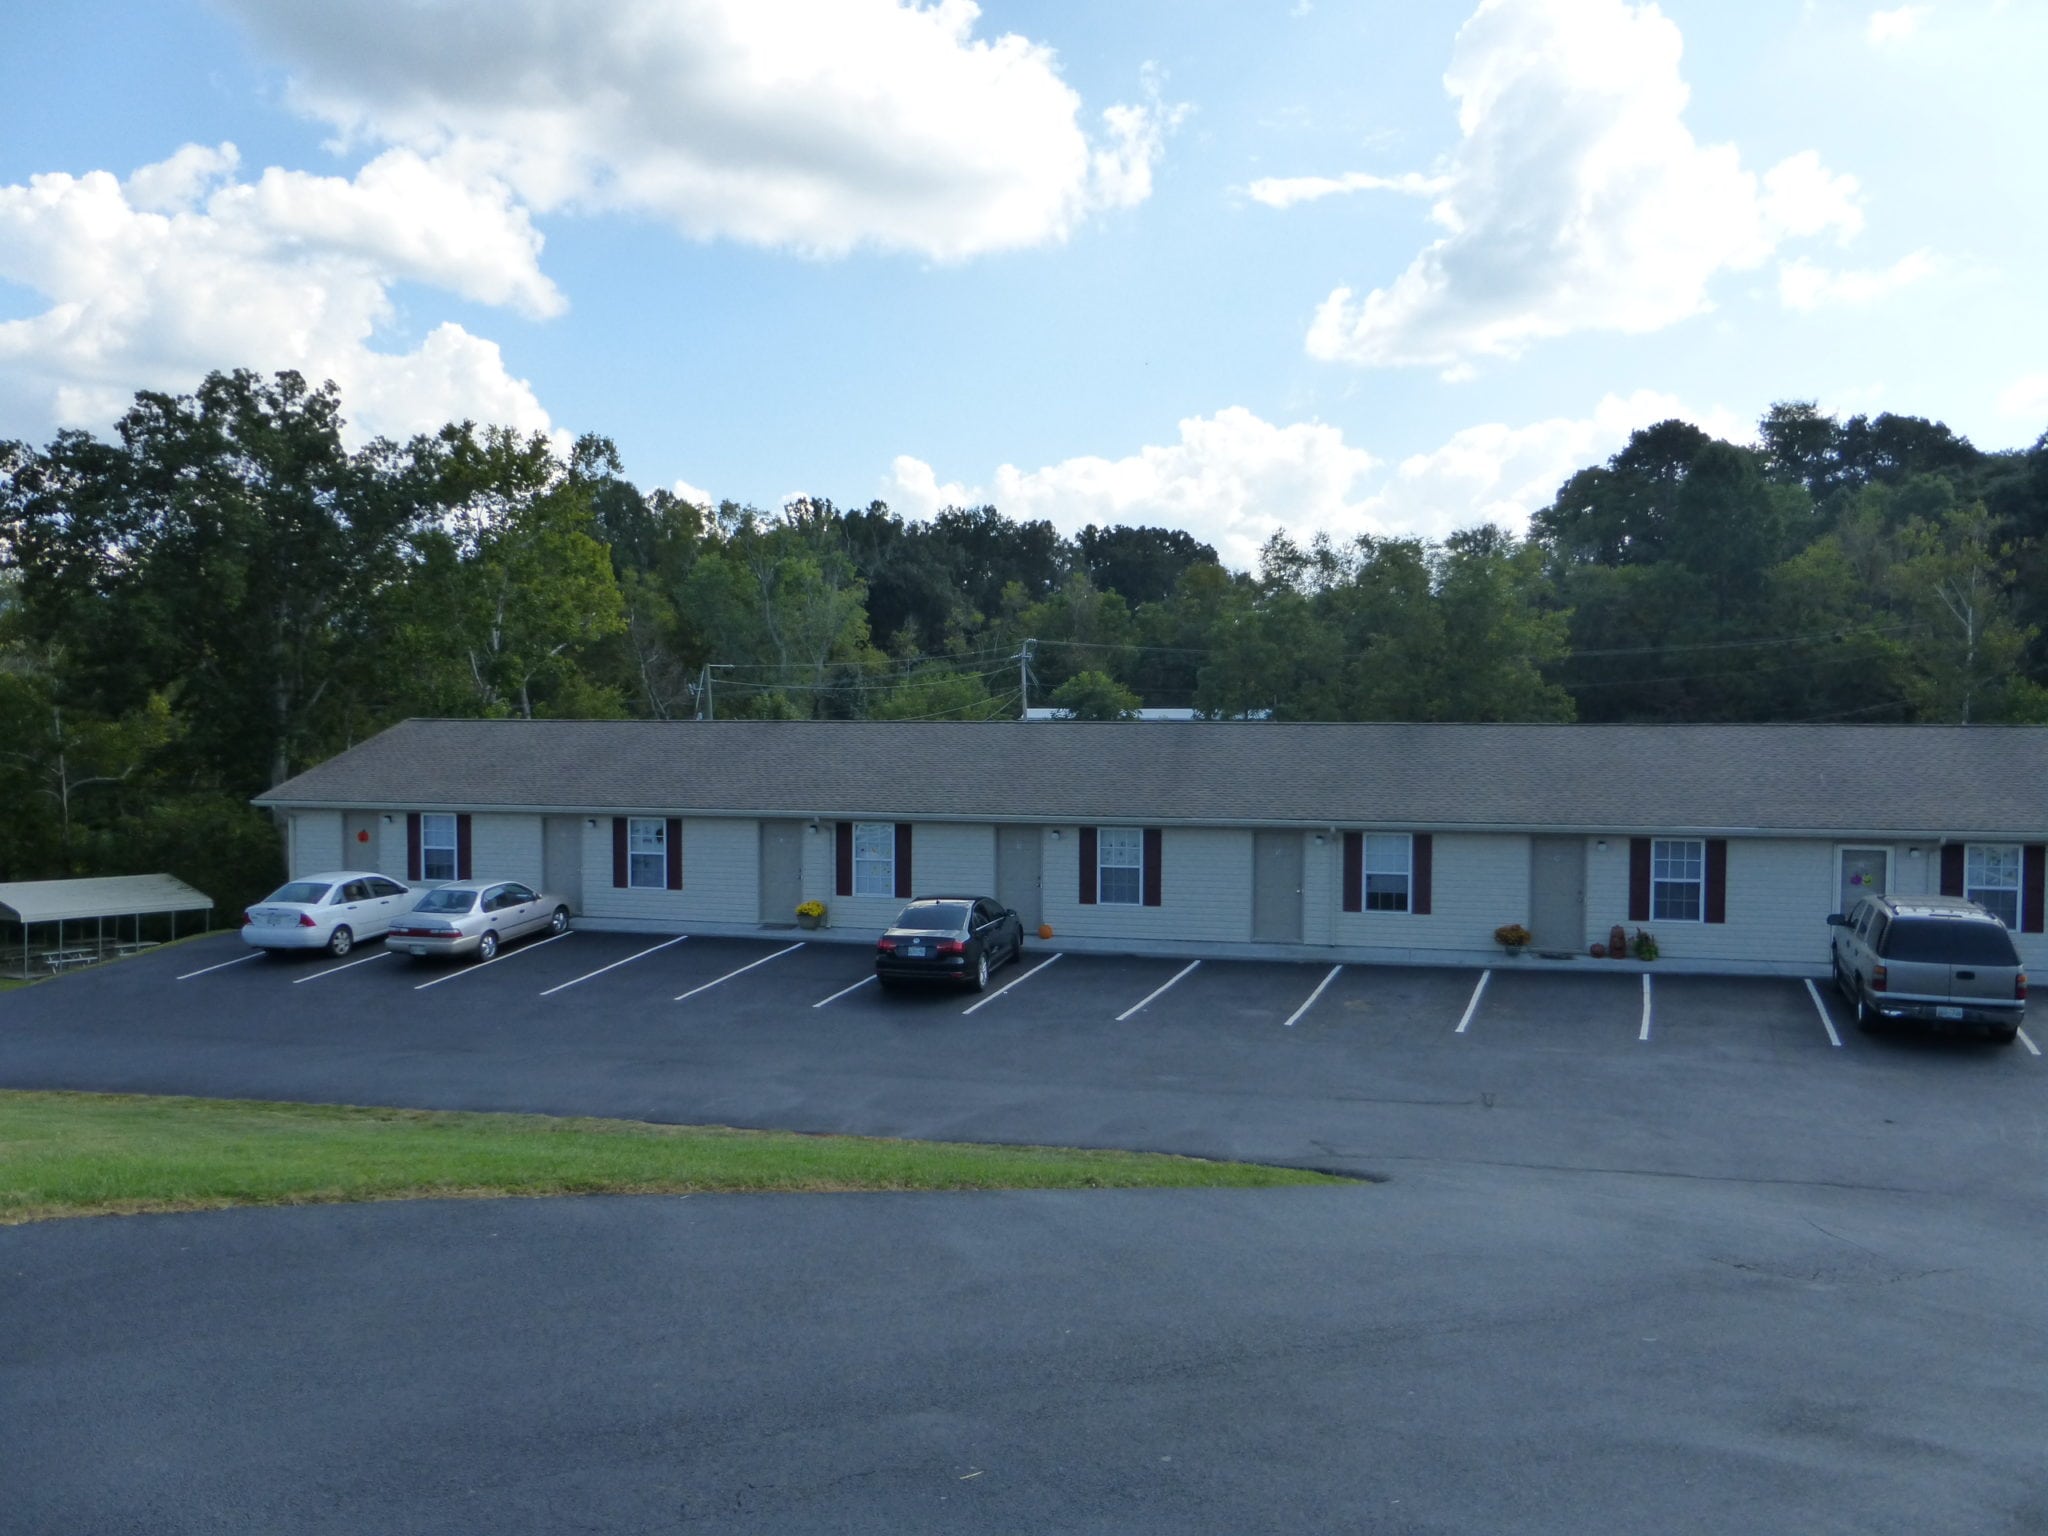 Brookside Apartments, located in Seymour, Tenn.